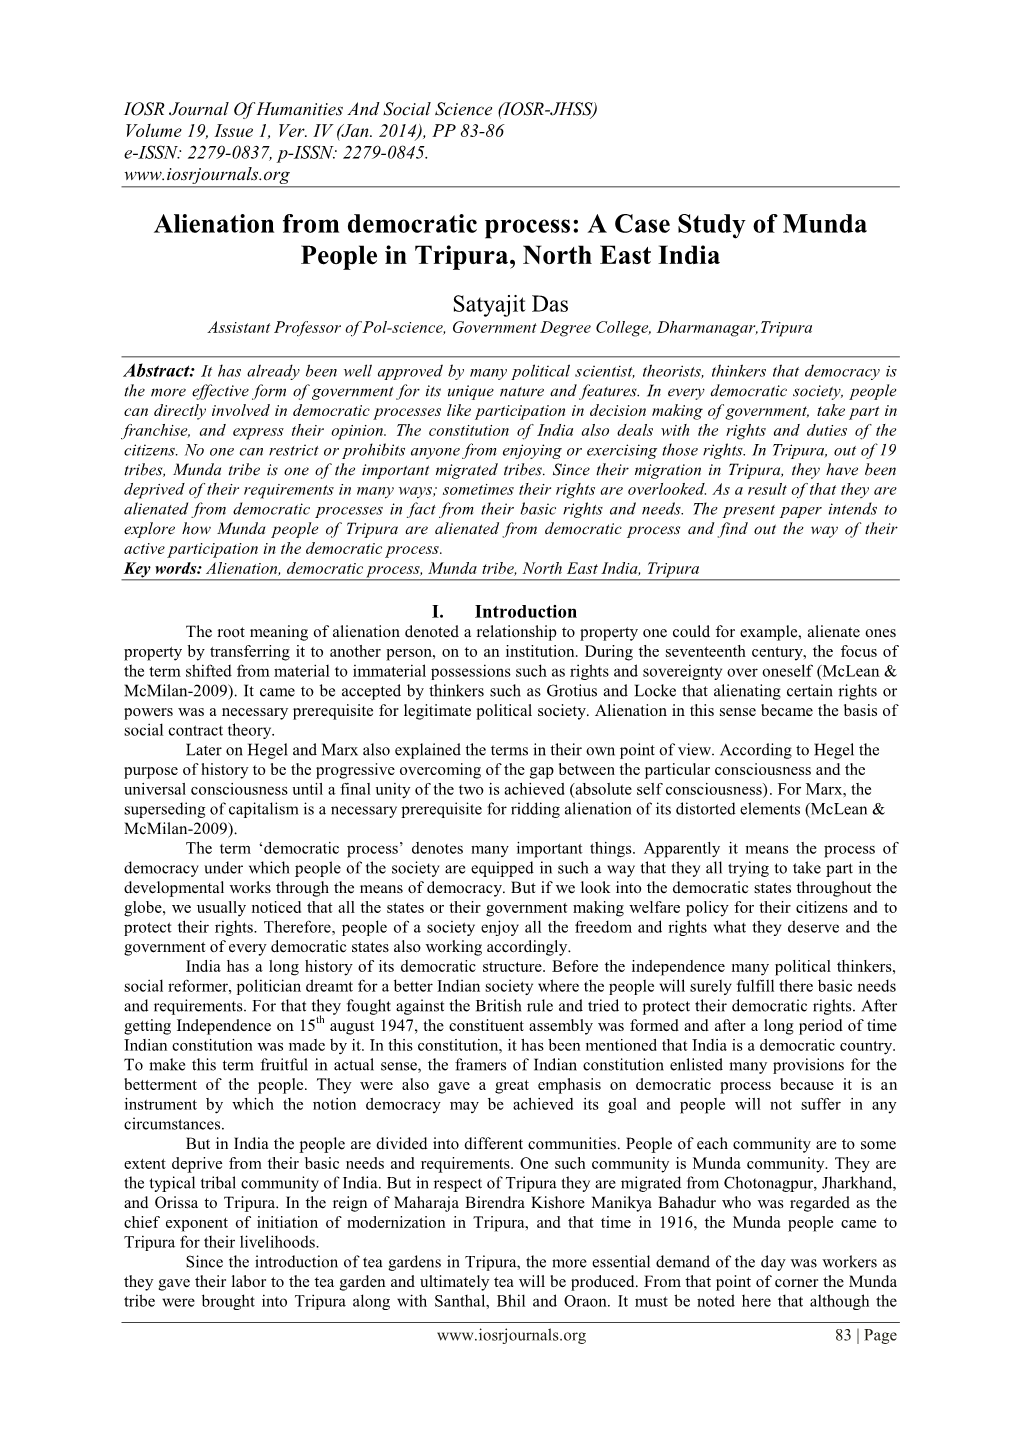 Alienation from Democratic Process: a Case Study of Munda People in Tripura, North East India